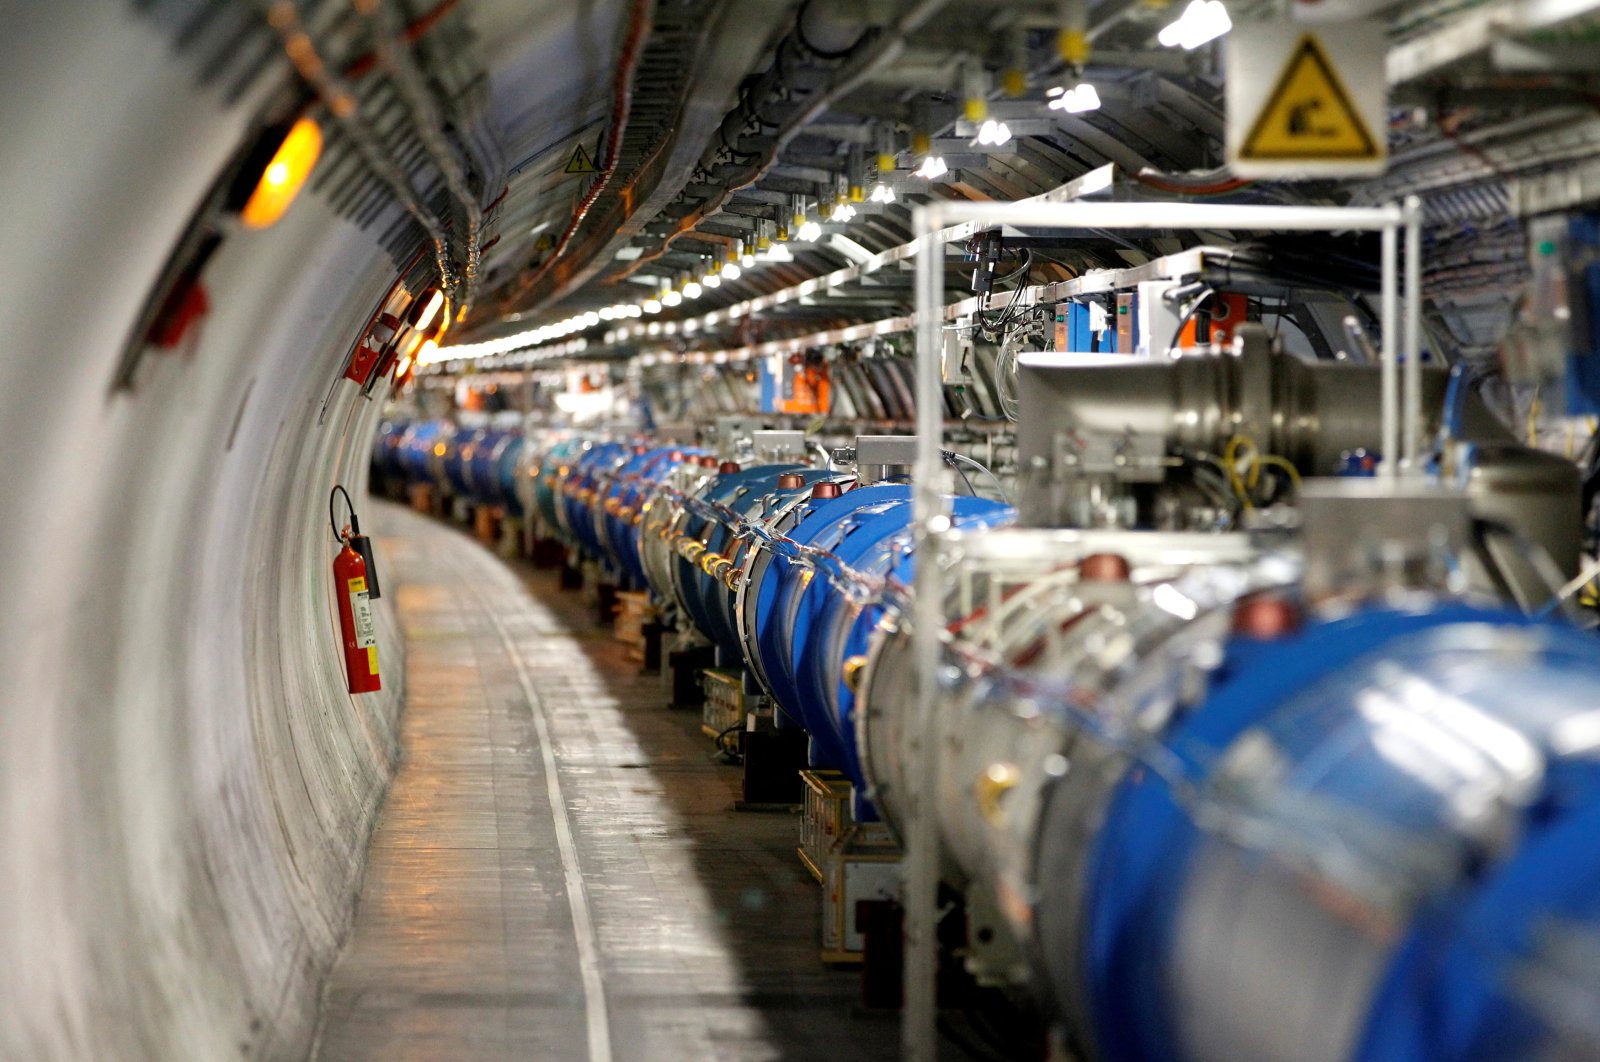 A general view of the Large Hadron Collider experiment is seen in the French village of Saint-Genis-Pouilly near Geneva, Switzerland, July 23, 2014.  (Reuters Photo)